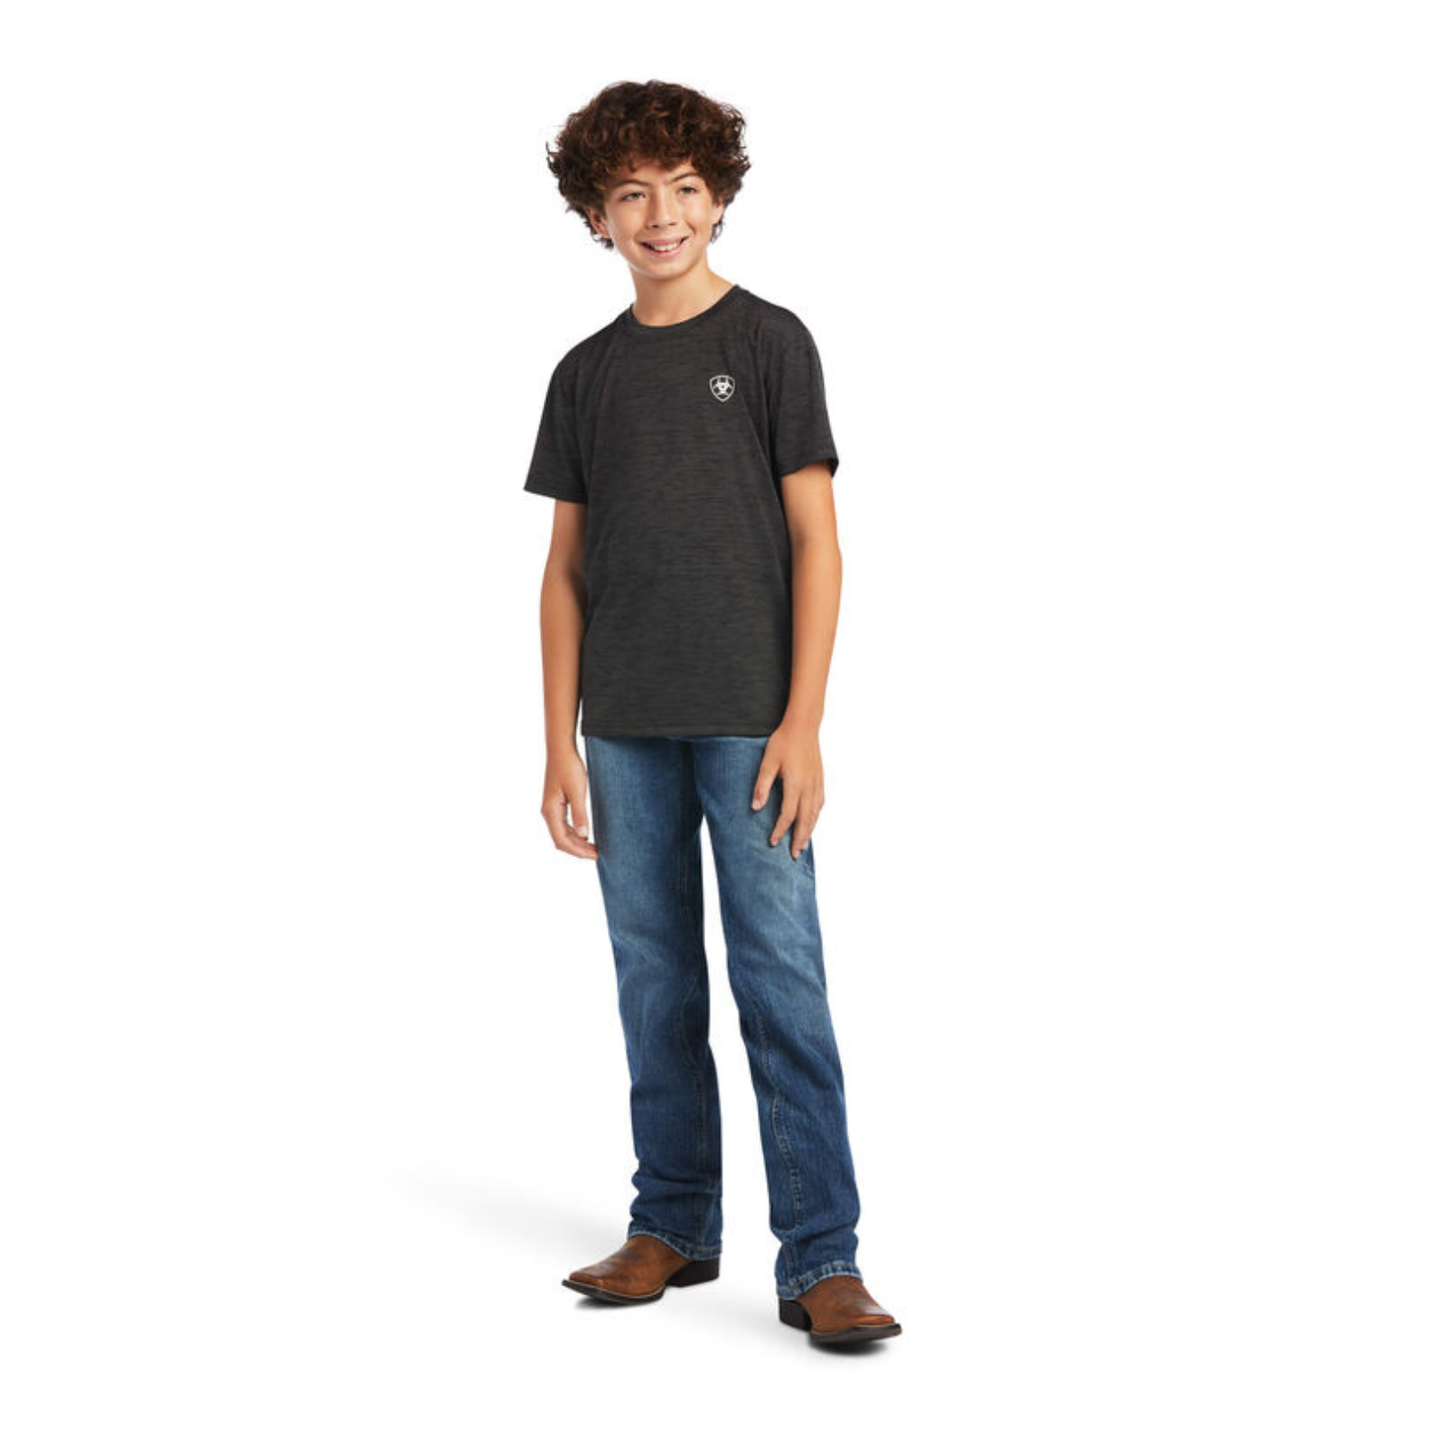 Ariat Children's Charger Patriotic Charcoal Graphic T-shirt 10040635